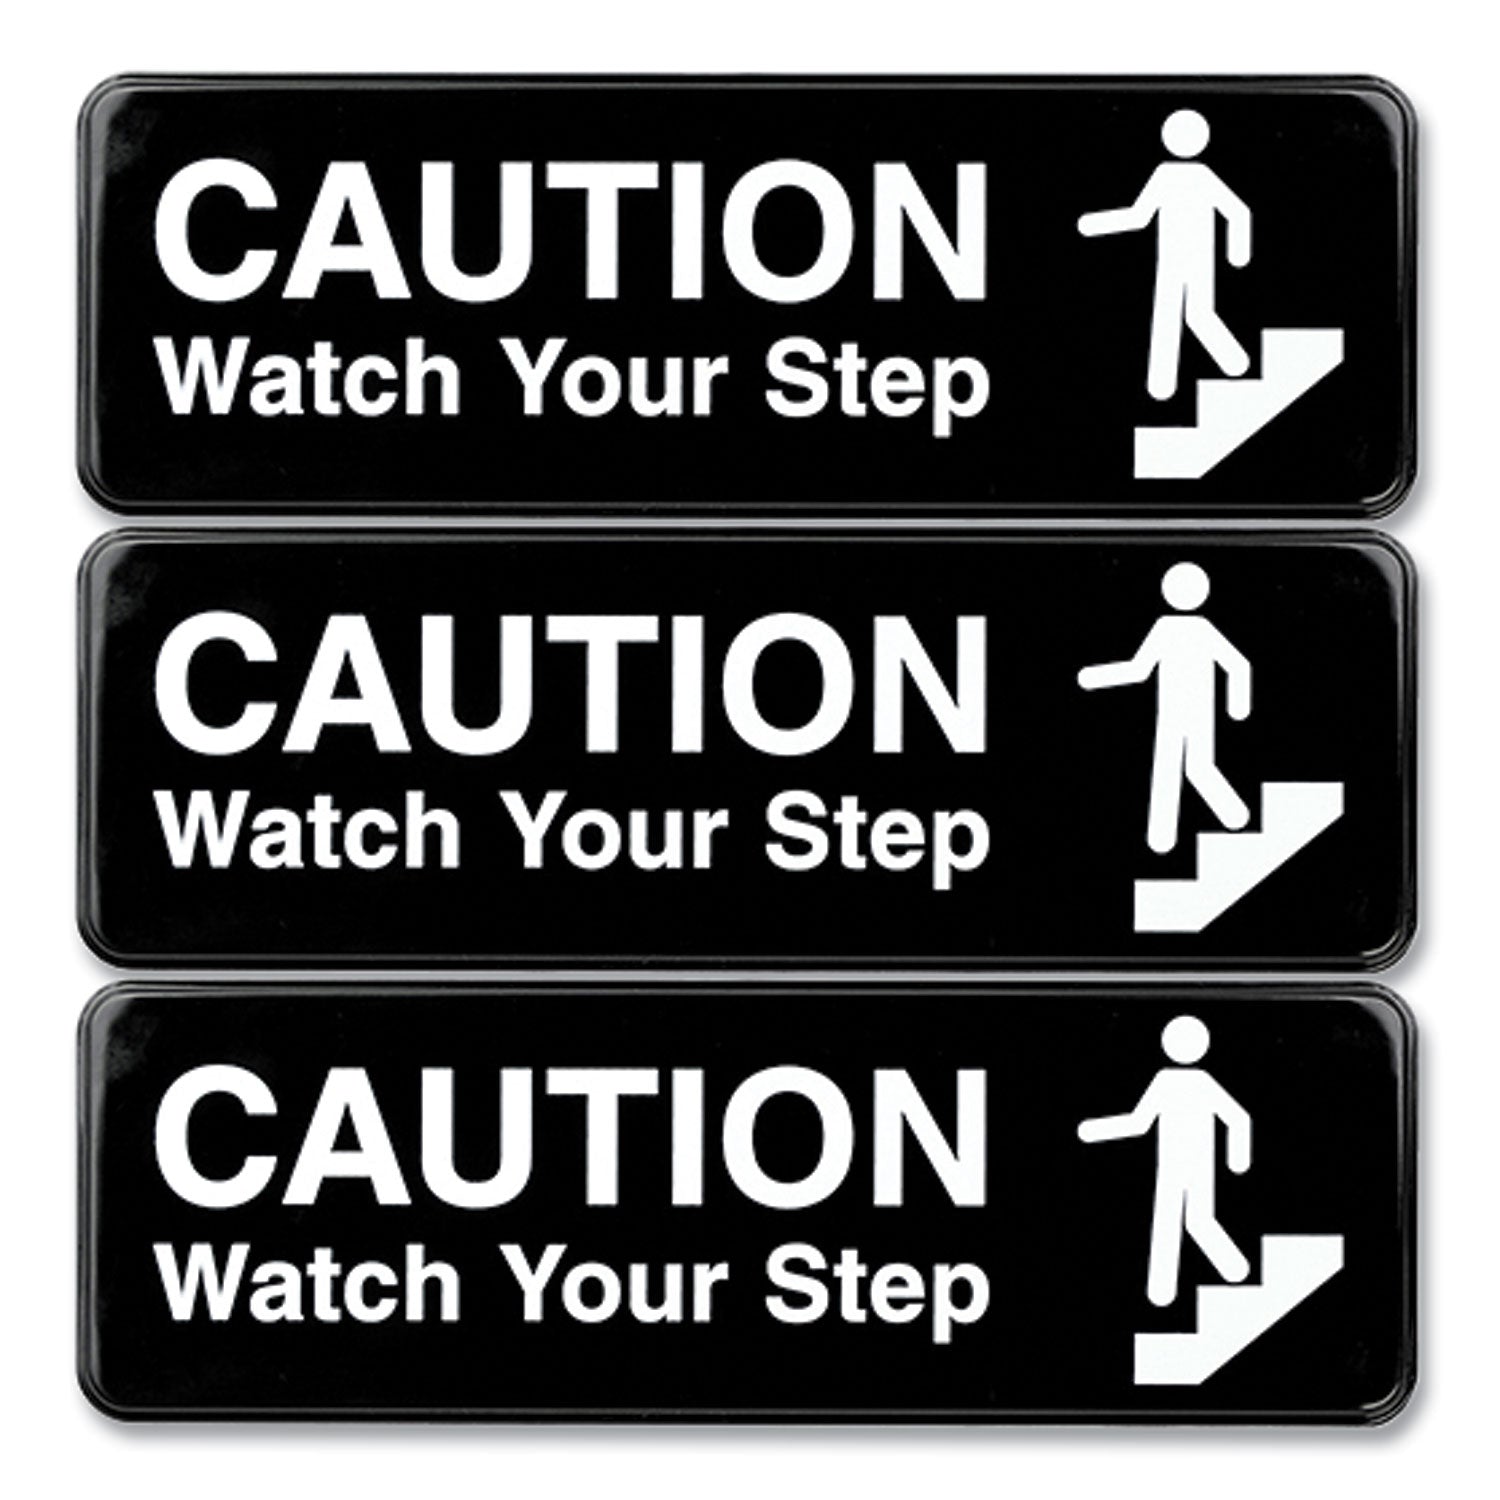 caution-watch-your-step-indoor-outdoor-wall-sign-9-x-3-black-face-white-graphics-3-pack_exohd0268s - 1